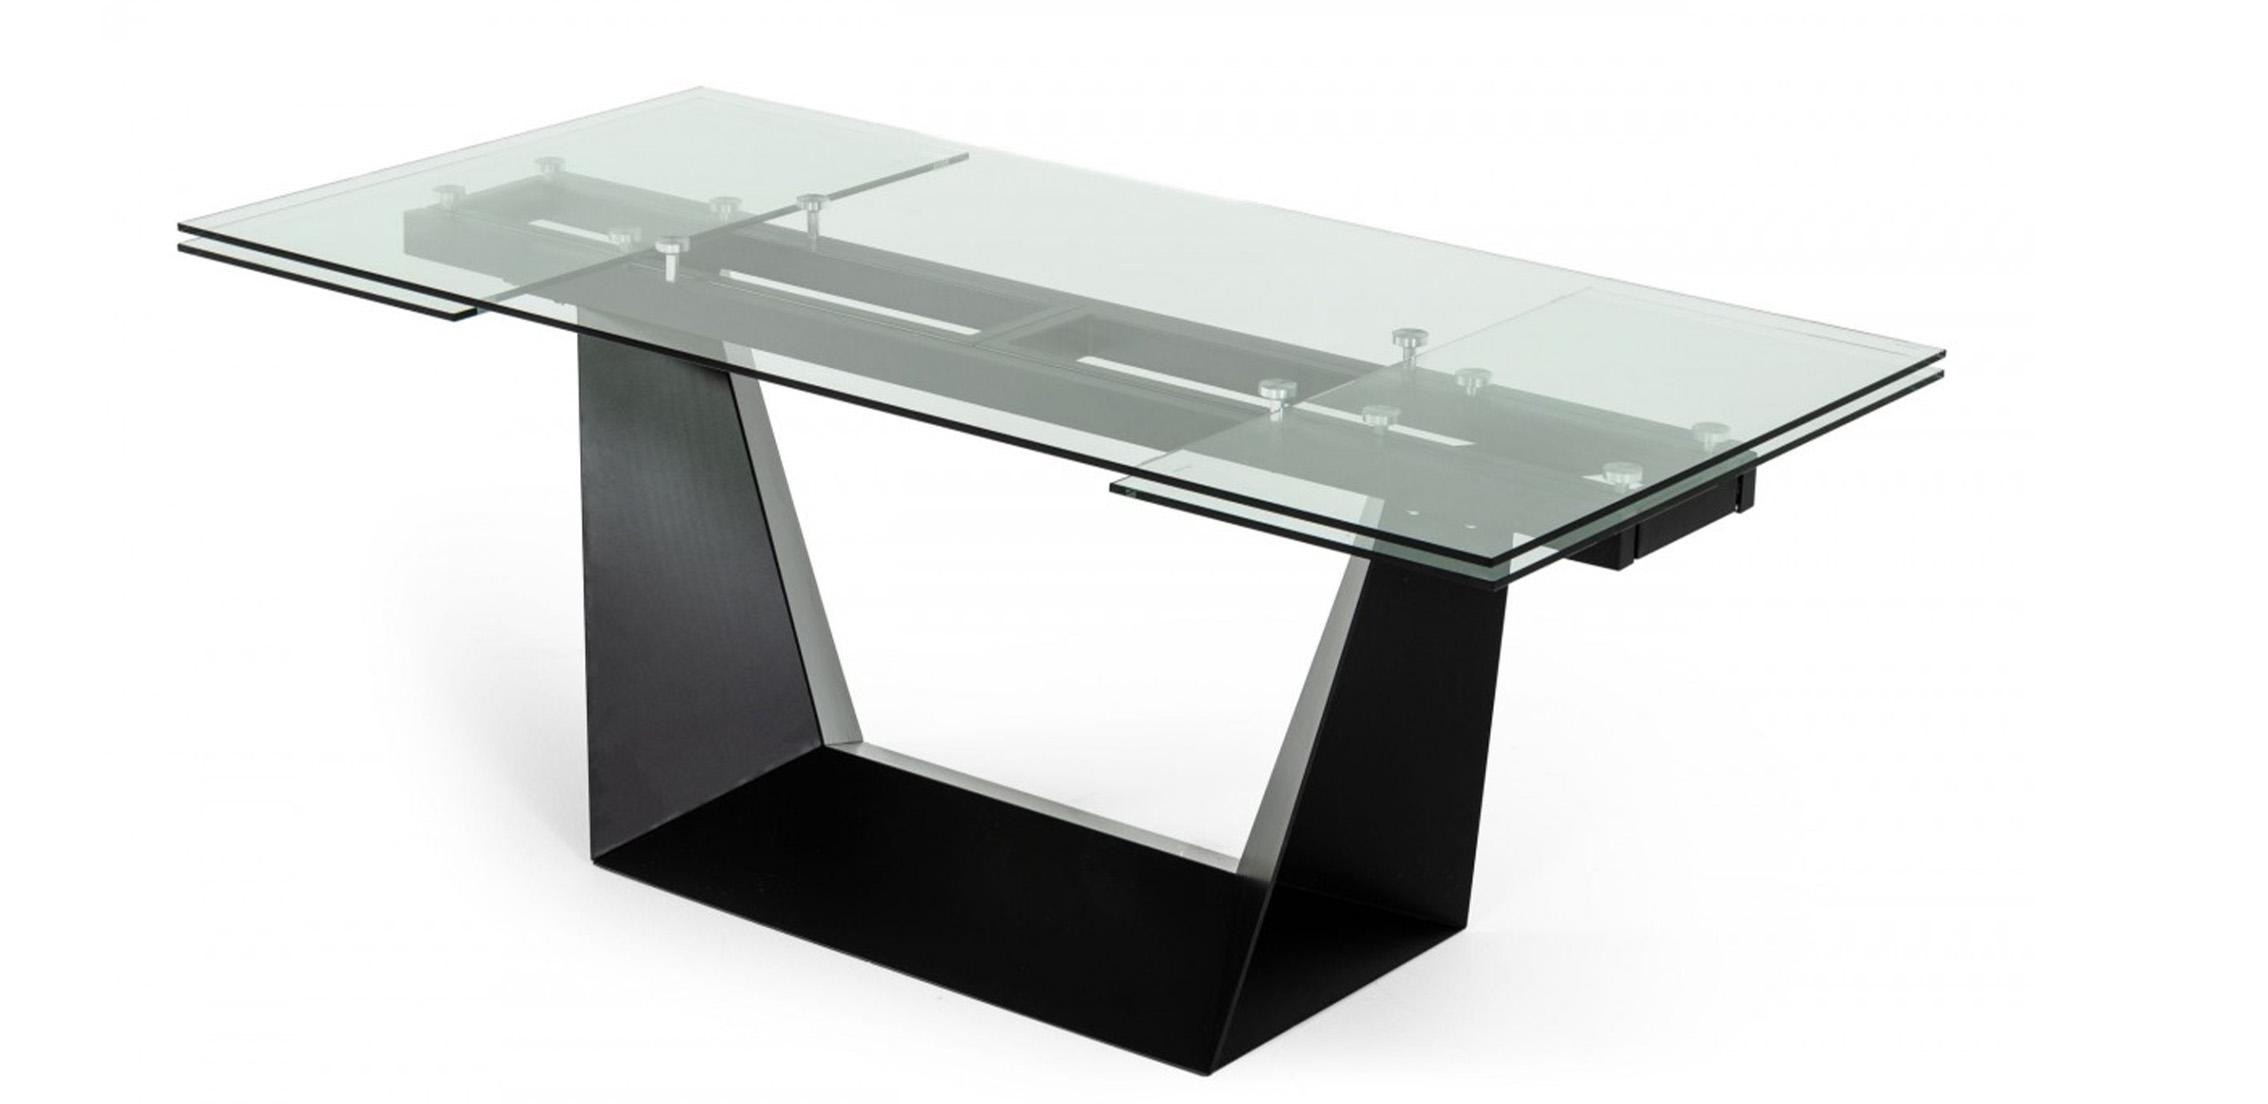 Contemporary, Modern Dining Table VGNSGD8684-BLK-DT VGNSGD8684-BLK-DT in Black 